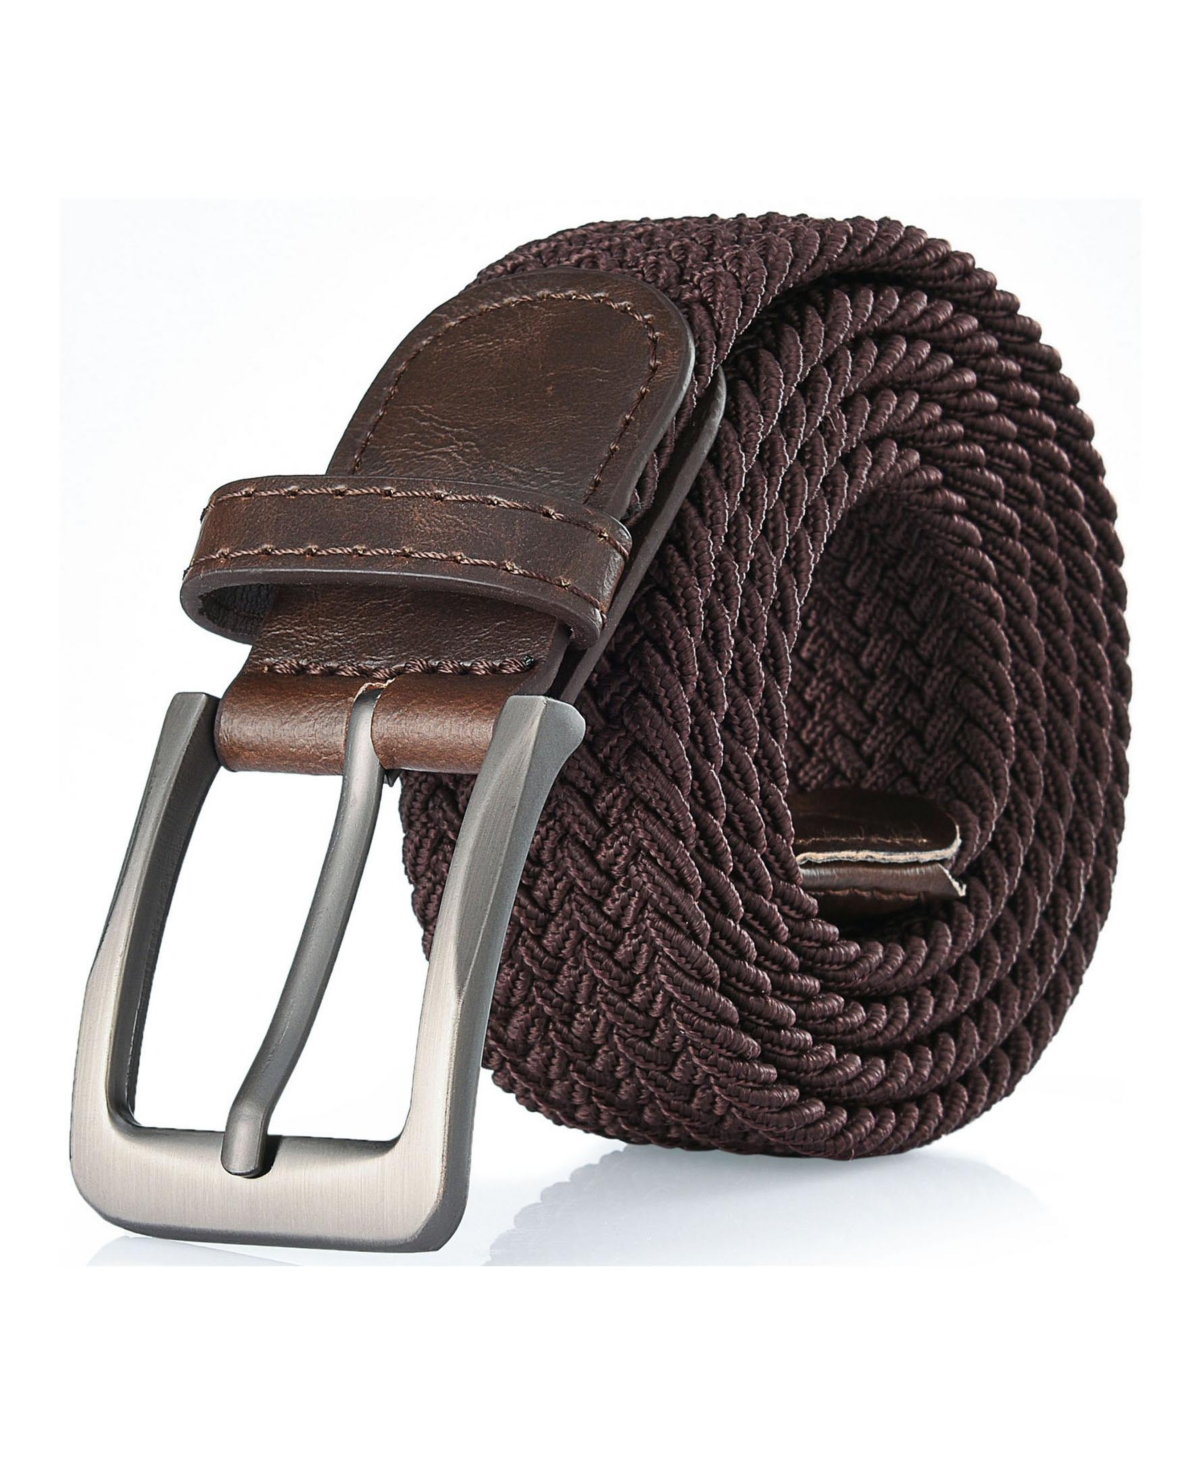 Men's Elastic Braided Stretch Belt for Big & Tall - Brown